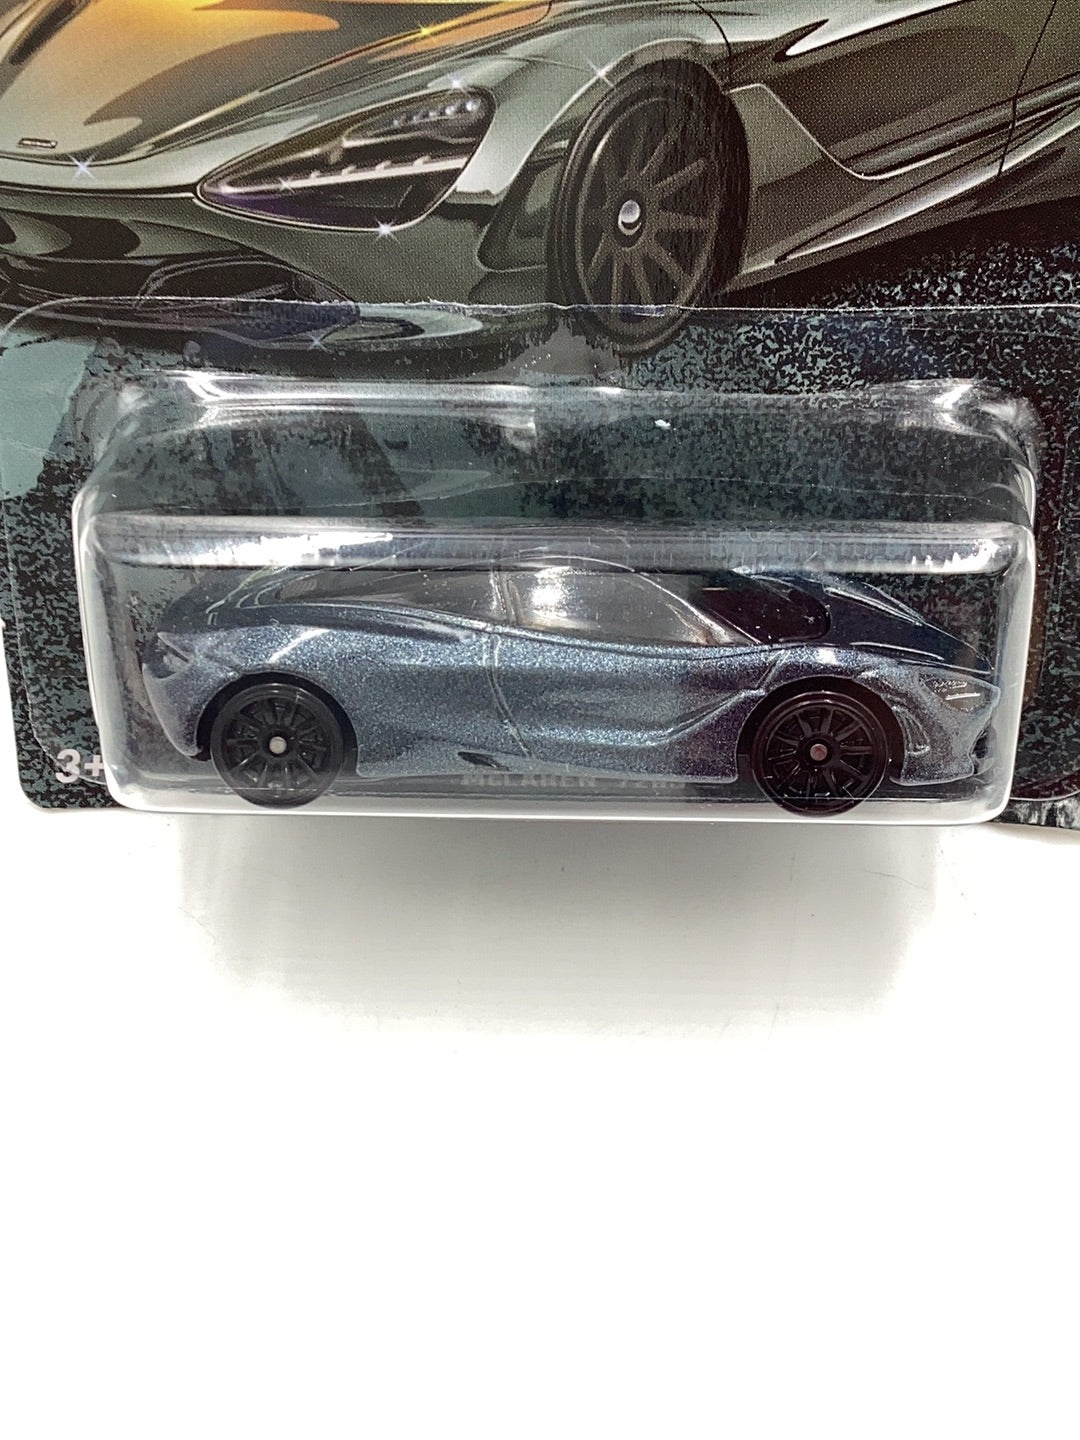 Hot wheels fast and furious 3/5 McLaren 720S 151I